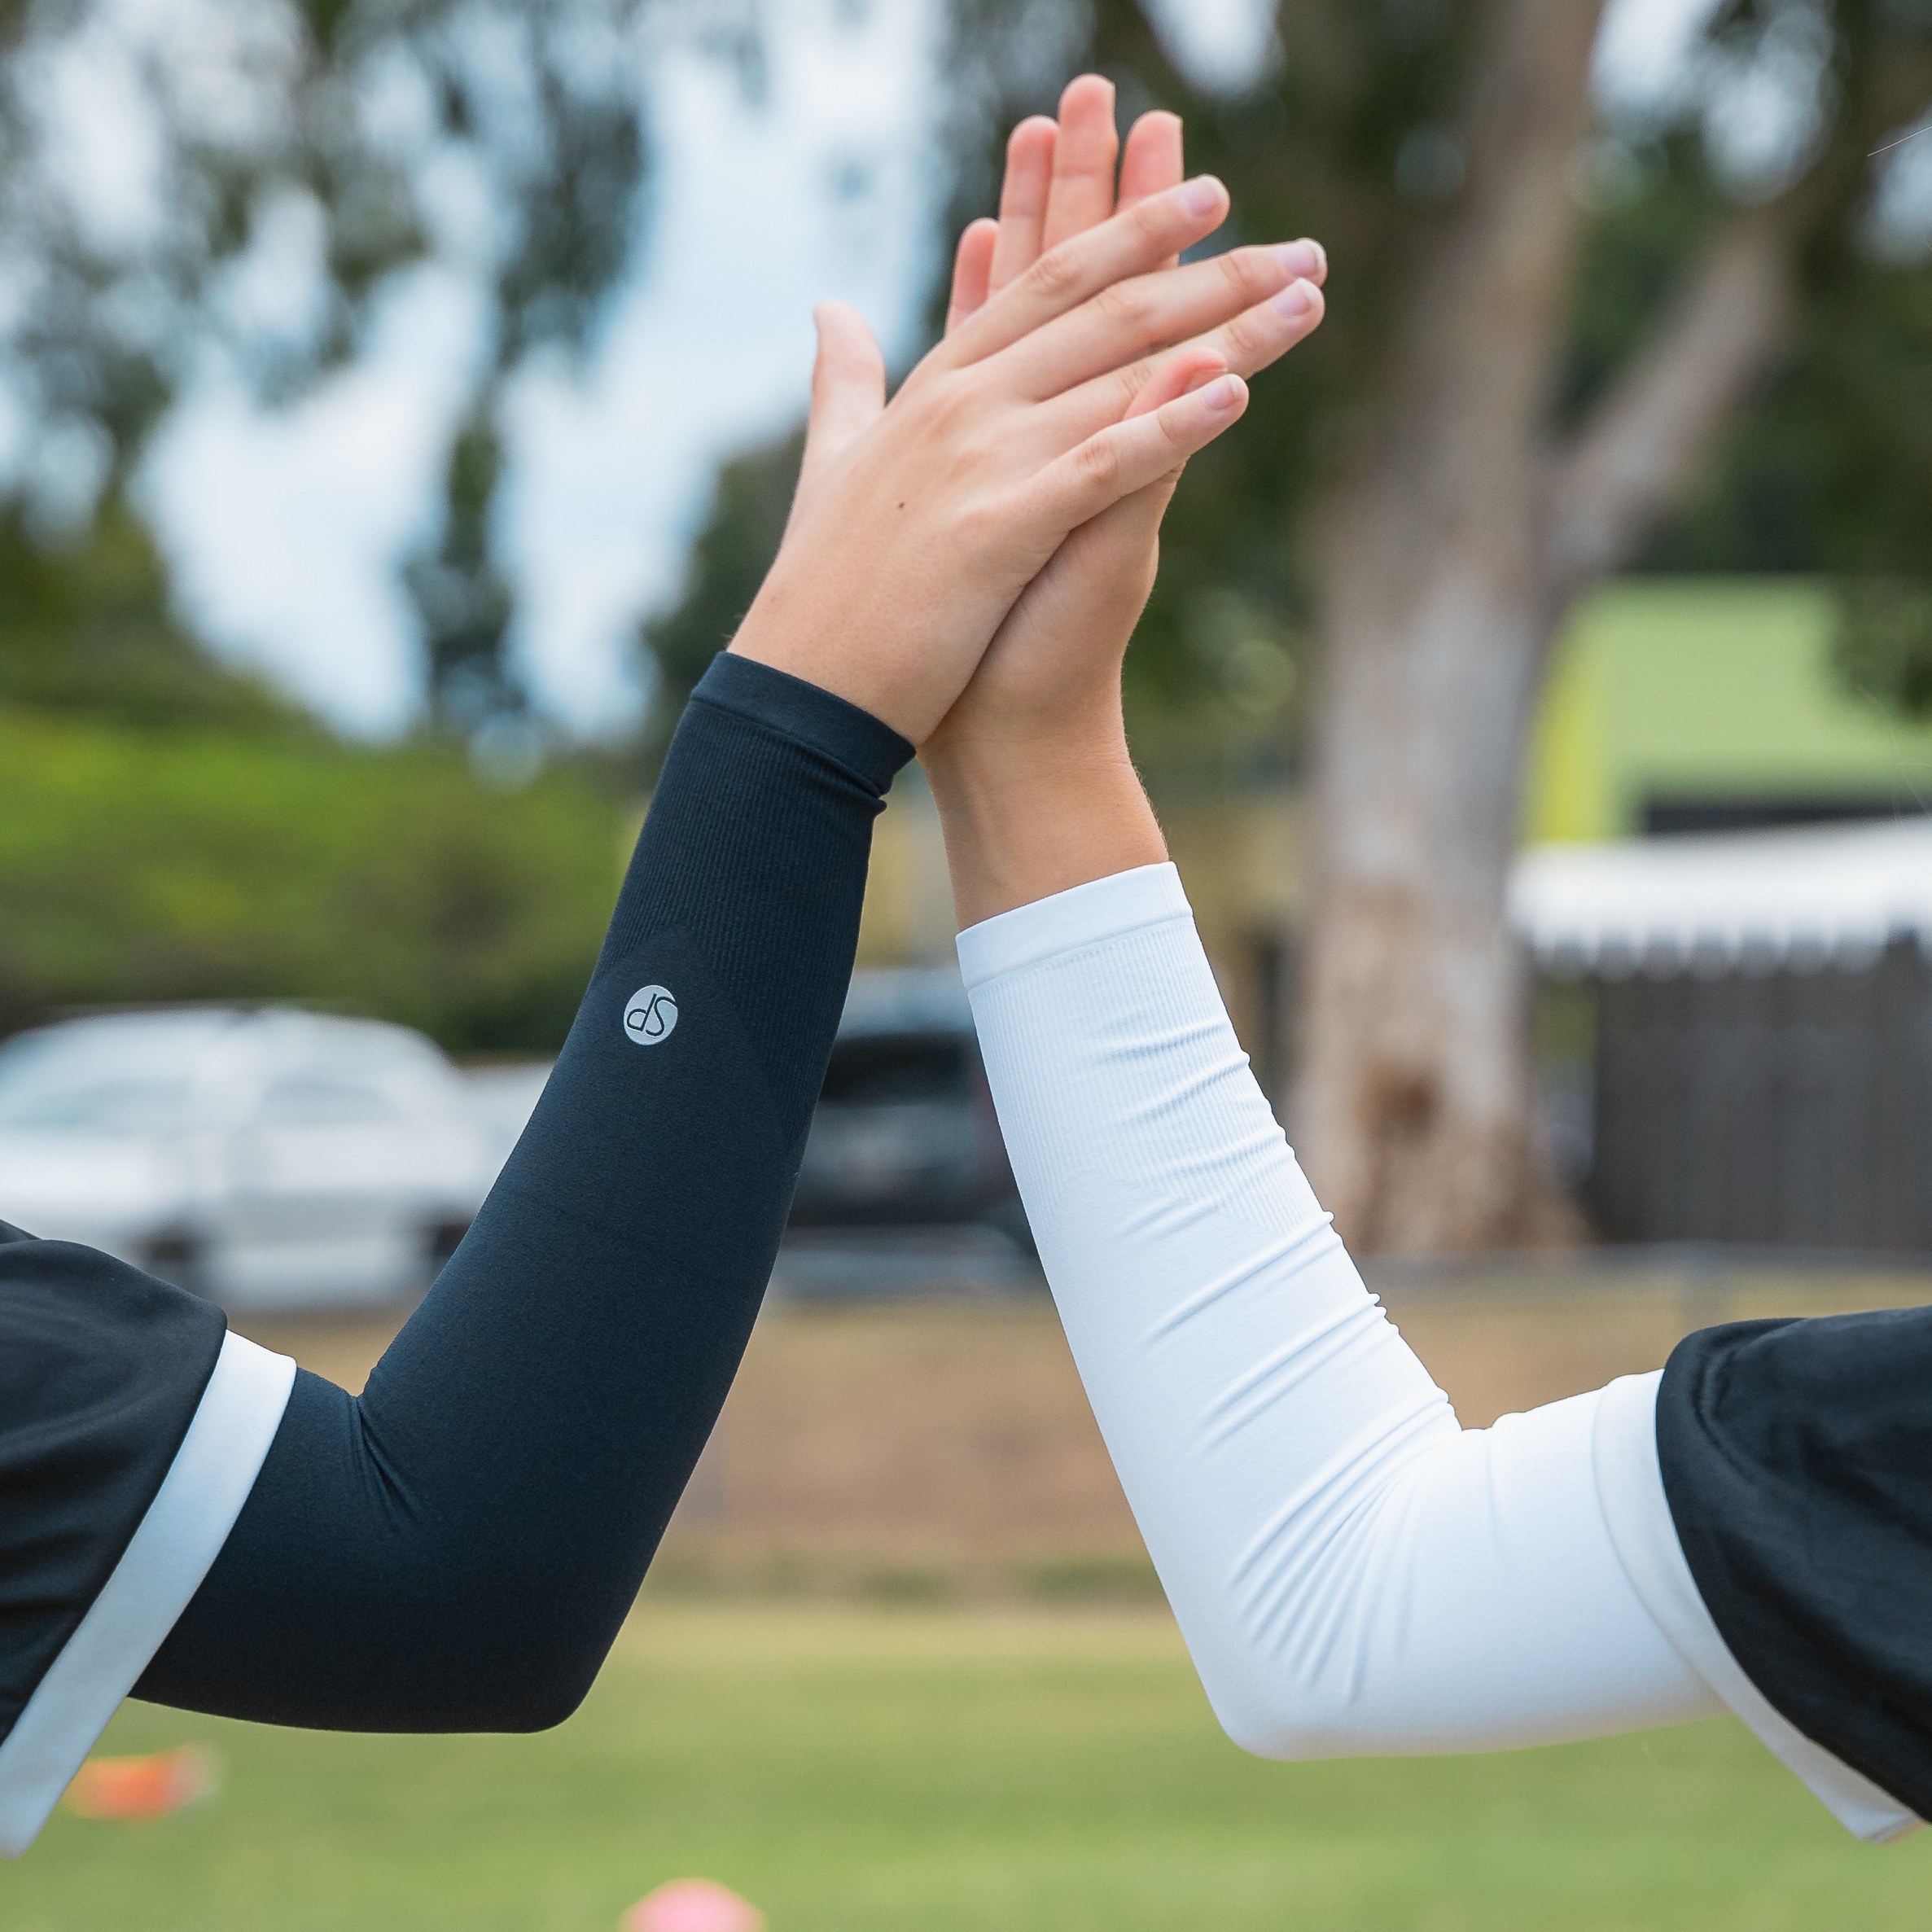 Image of two people wearing SParms sun sleeves and high-fiving.